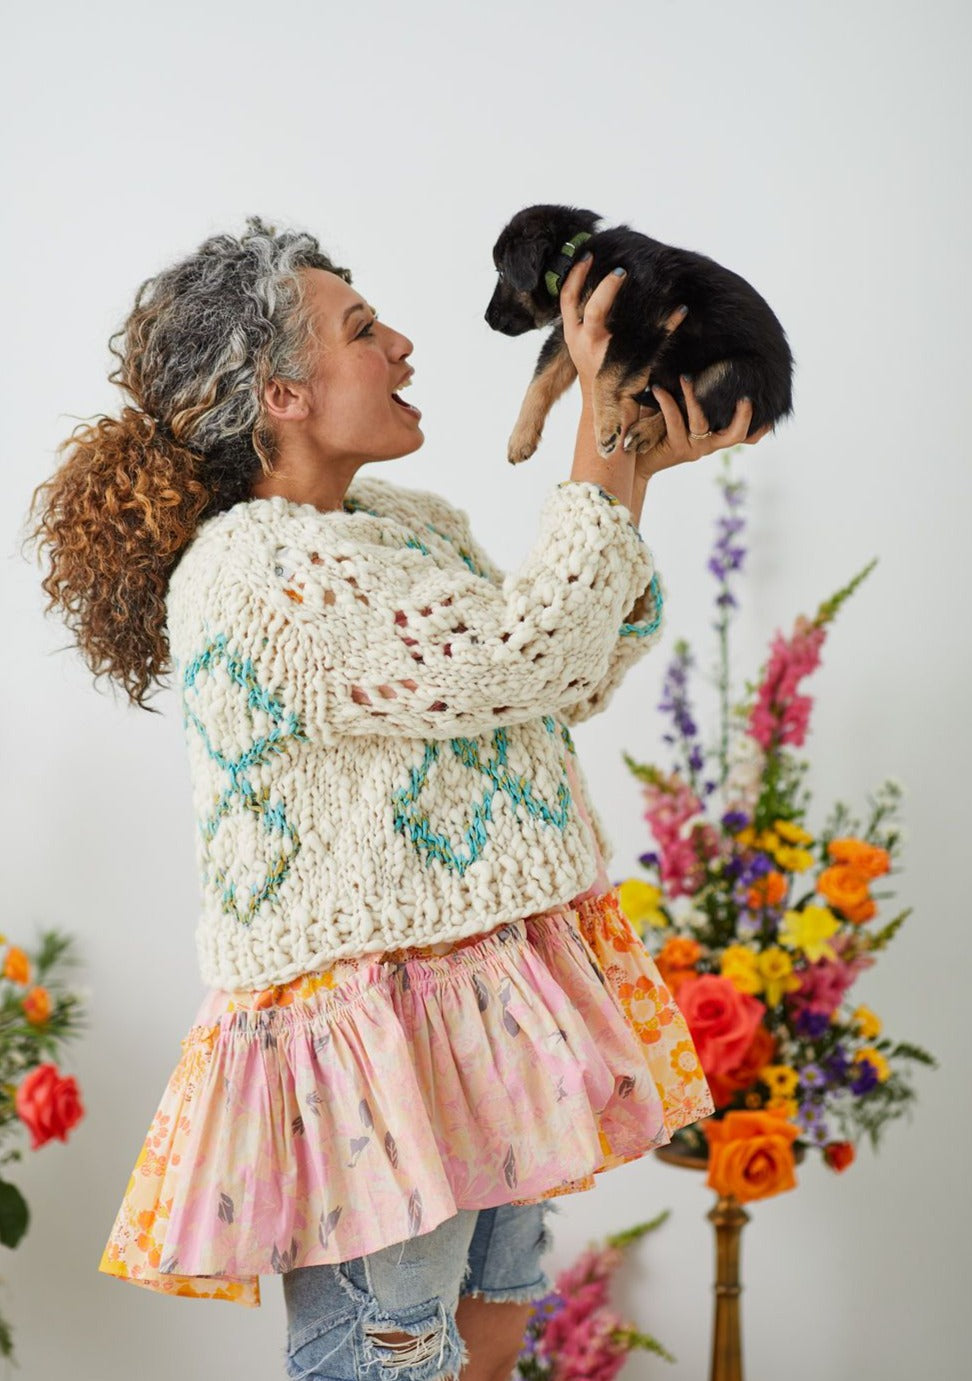 Model wearing High Fives Cardi holding a little black and tan puppy